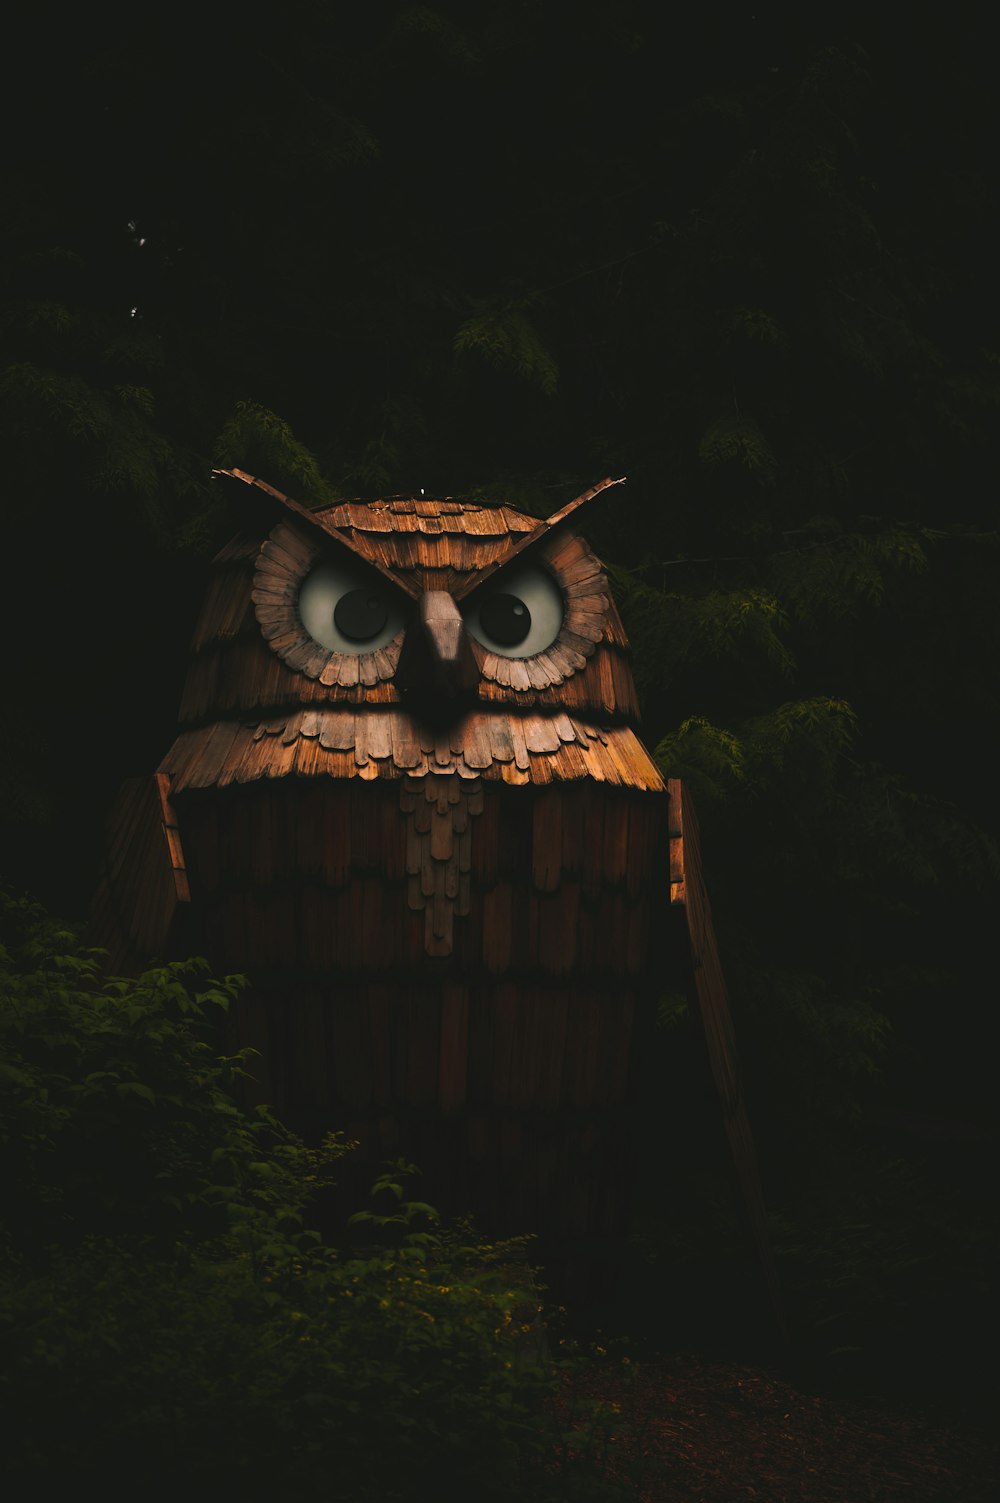 an owl statue is lit up in the dark